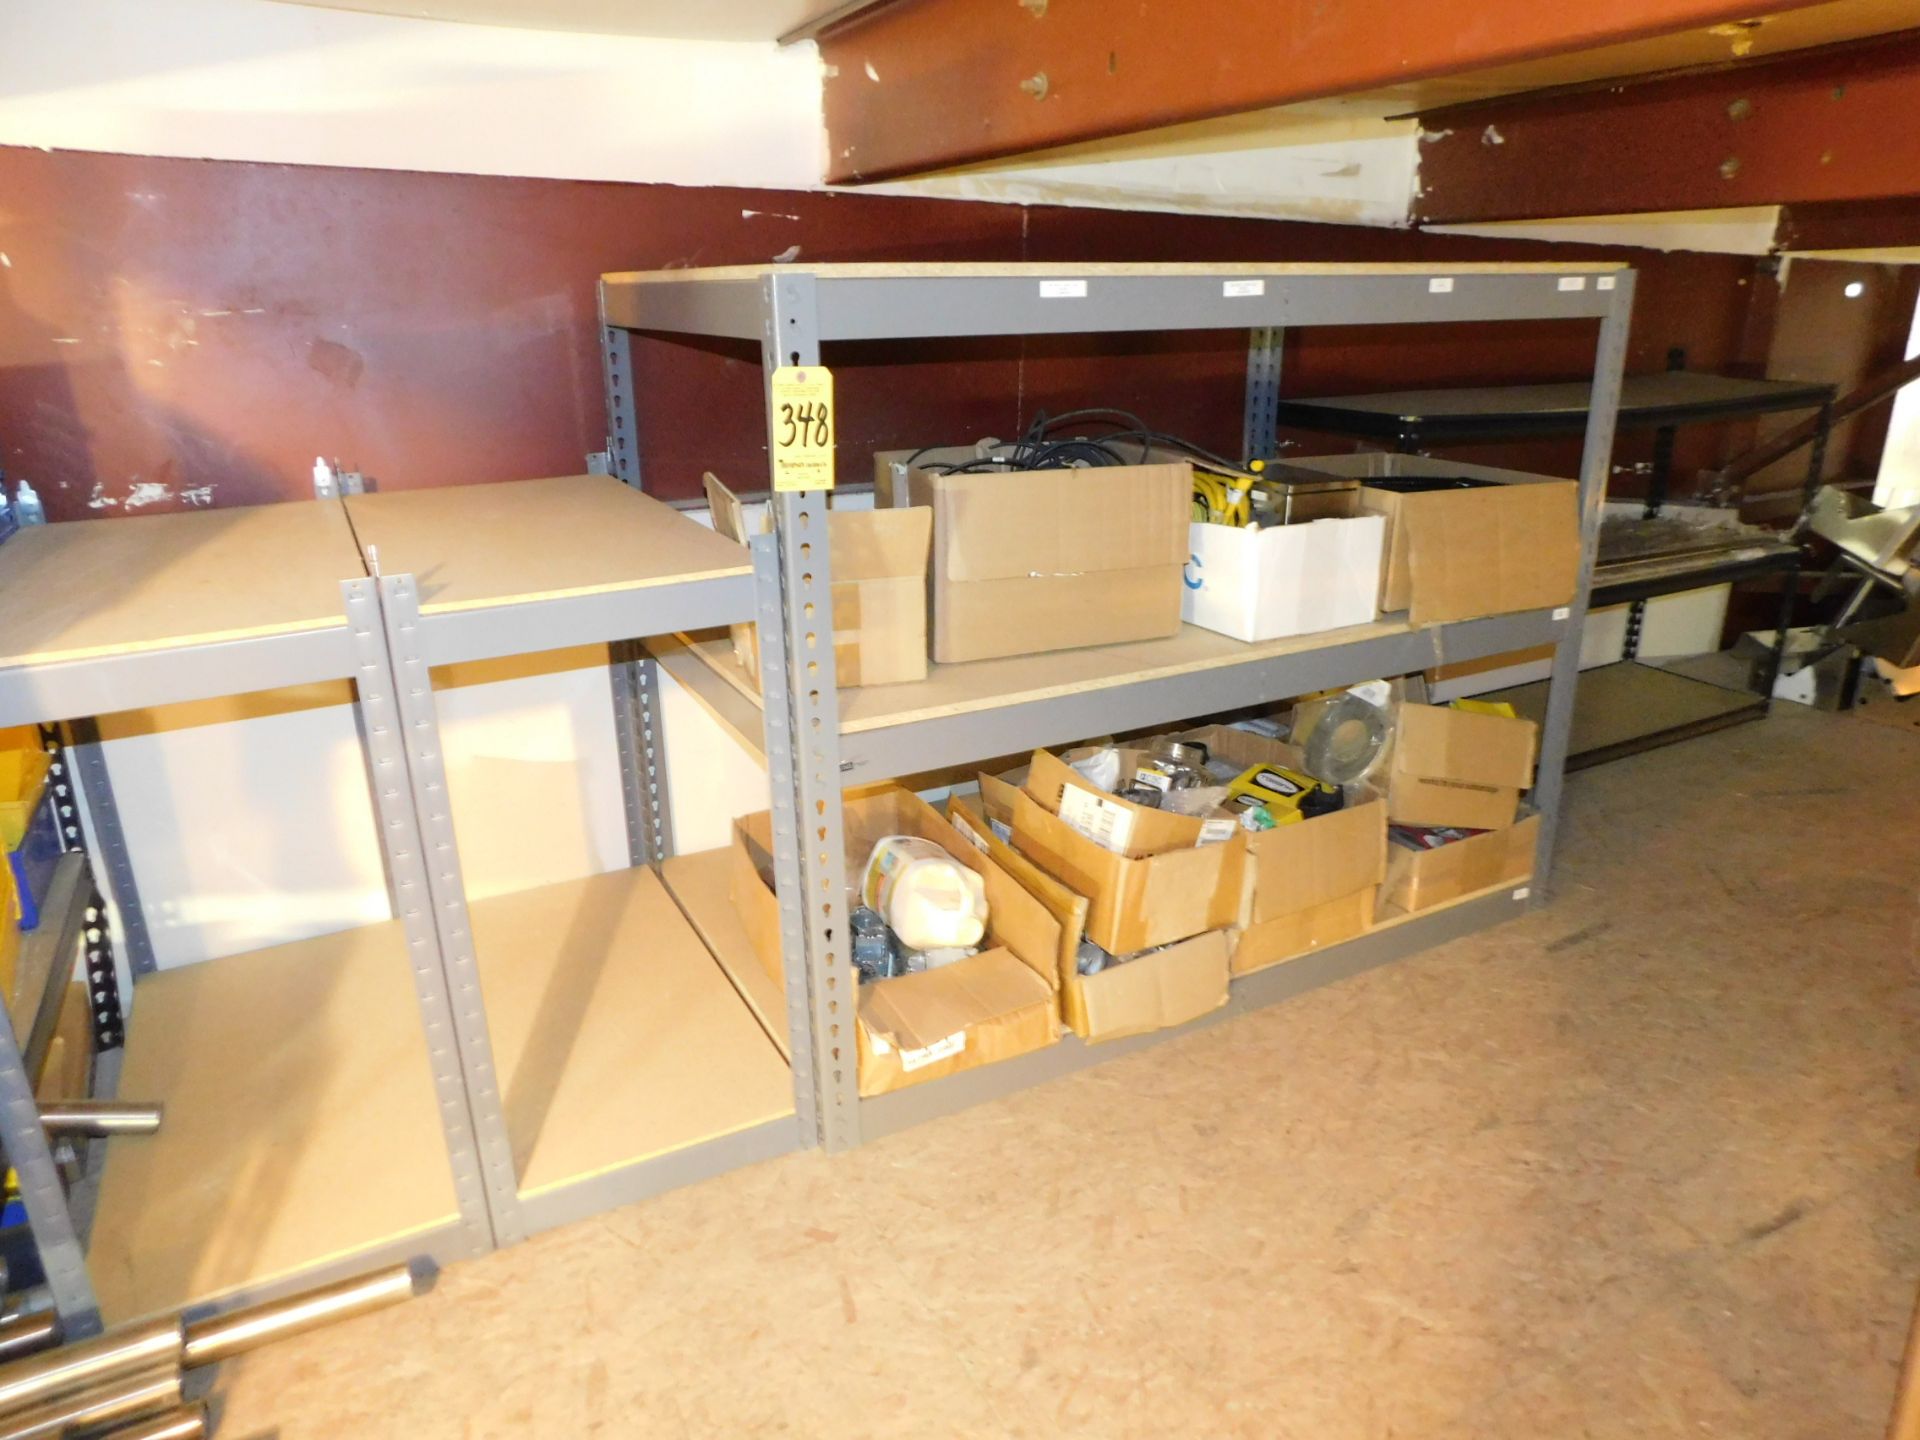 Shelving and Contents, 4' H x 5' W x 3' D, (2) Shelving Units 3' x 3' x 18" D and Shelving Unit